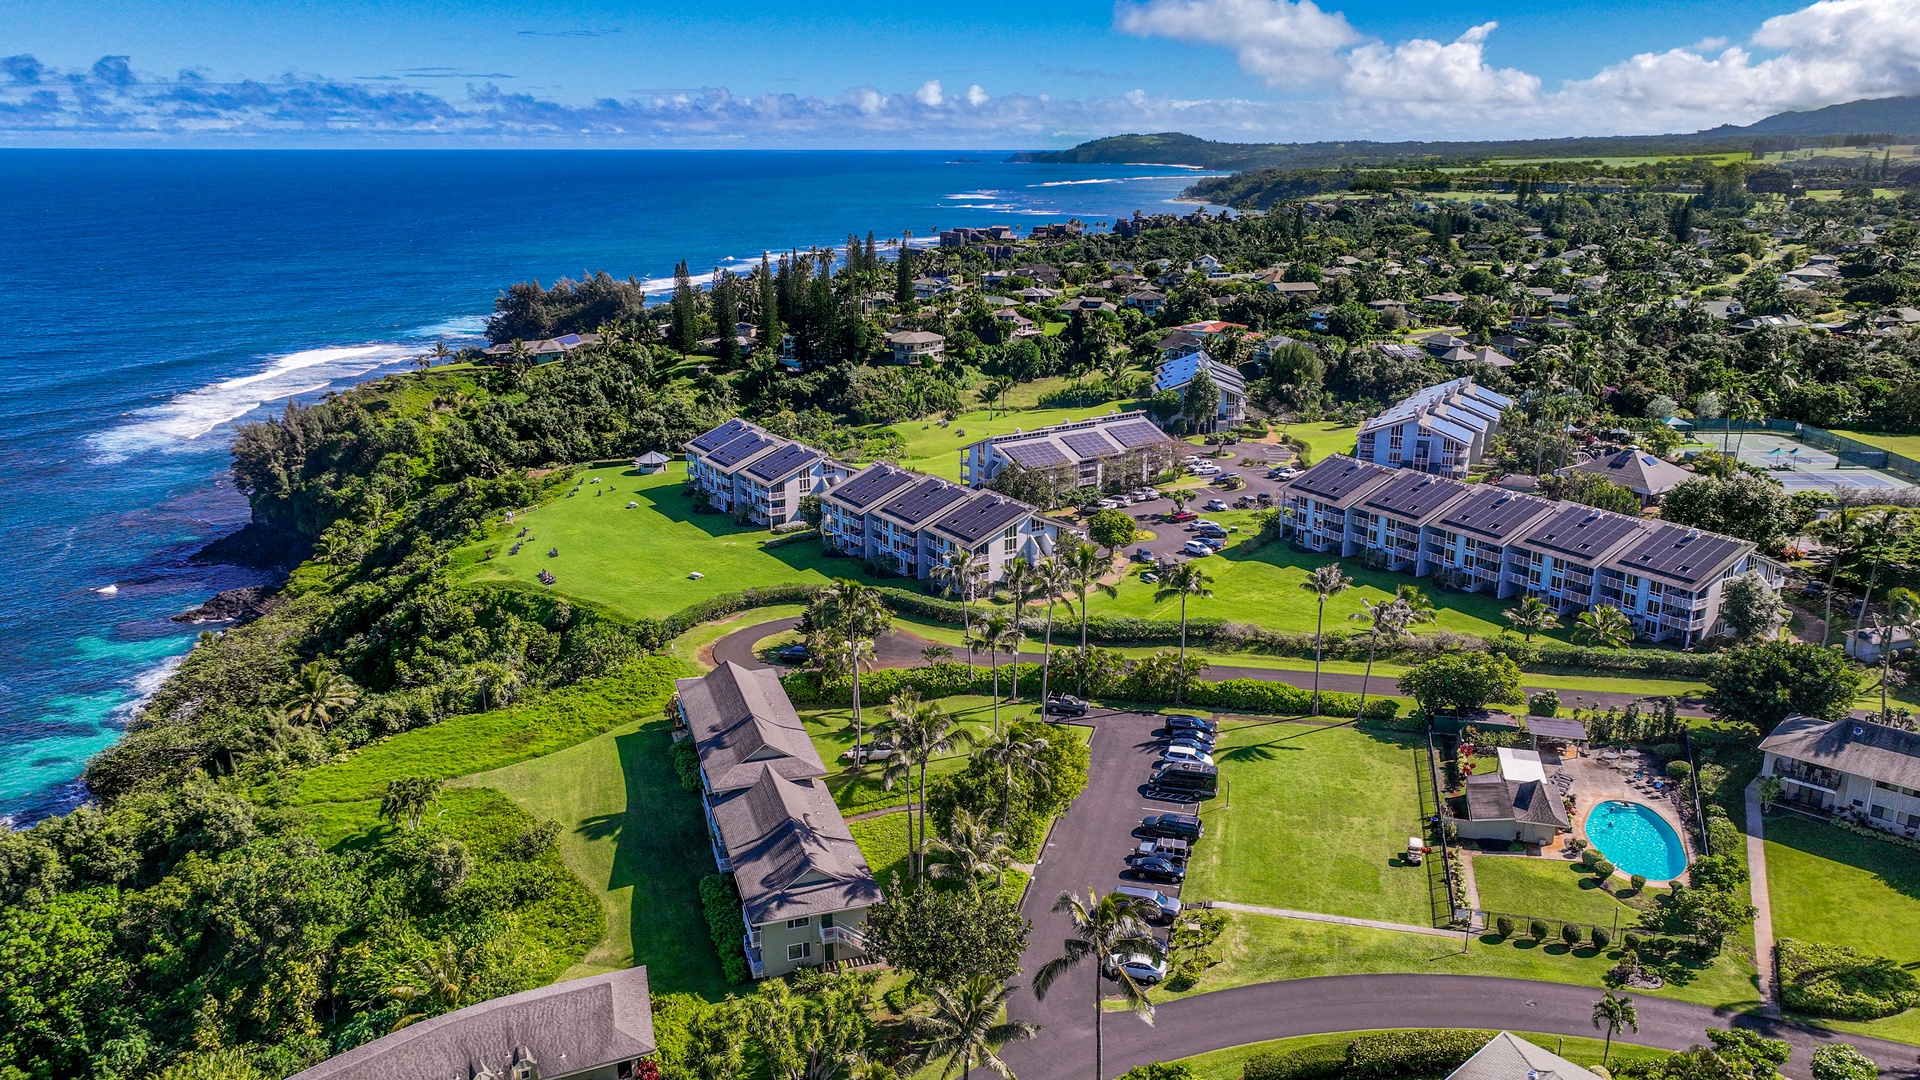 Princeville Vacation Rentals, Alii Kai 7201 - Parking options in front of the building.